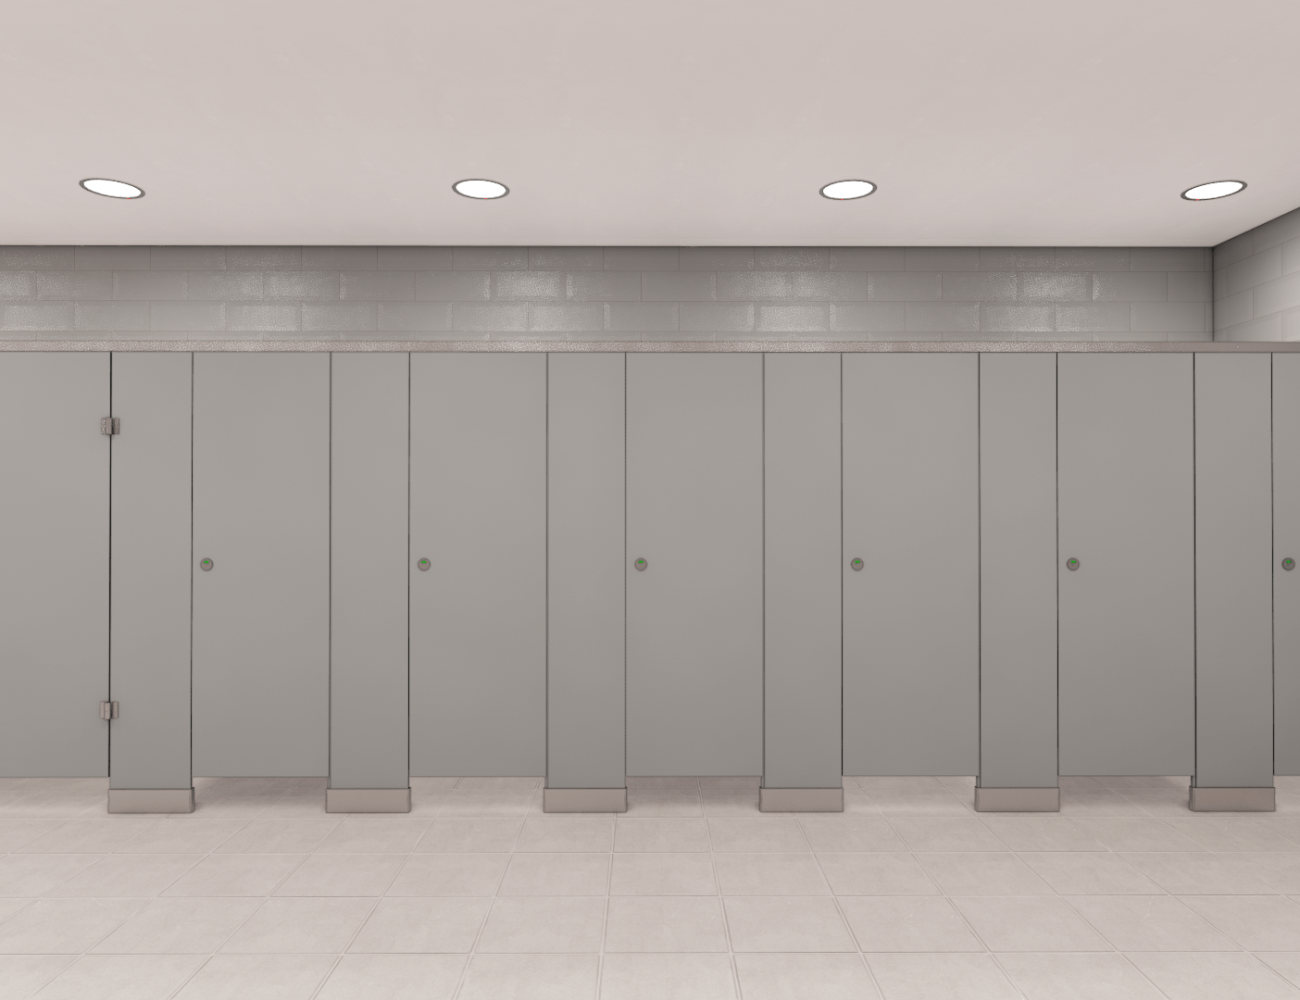 Solid Phenolic Toilet Partitions - Manufactured in Canada - Boreal Architectural Products